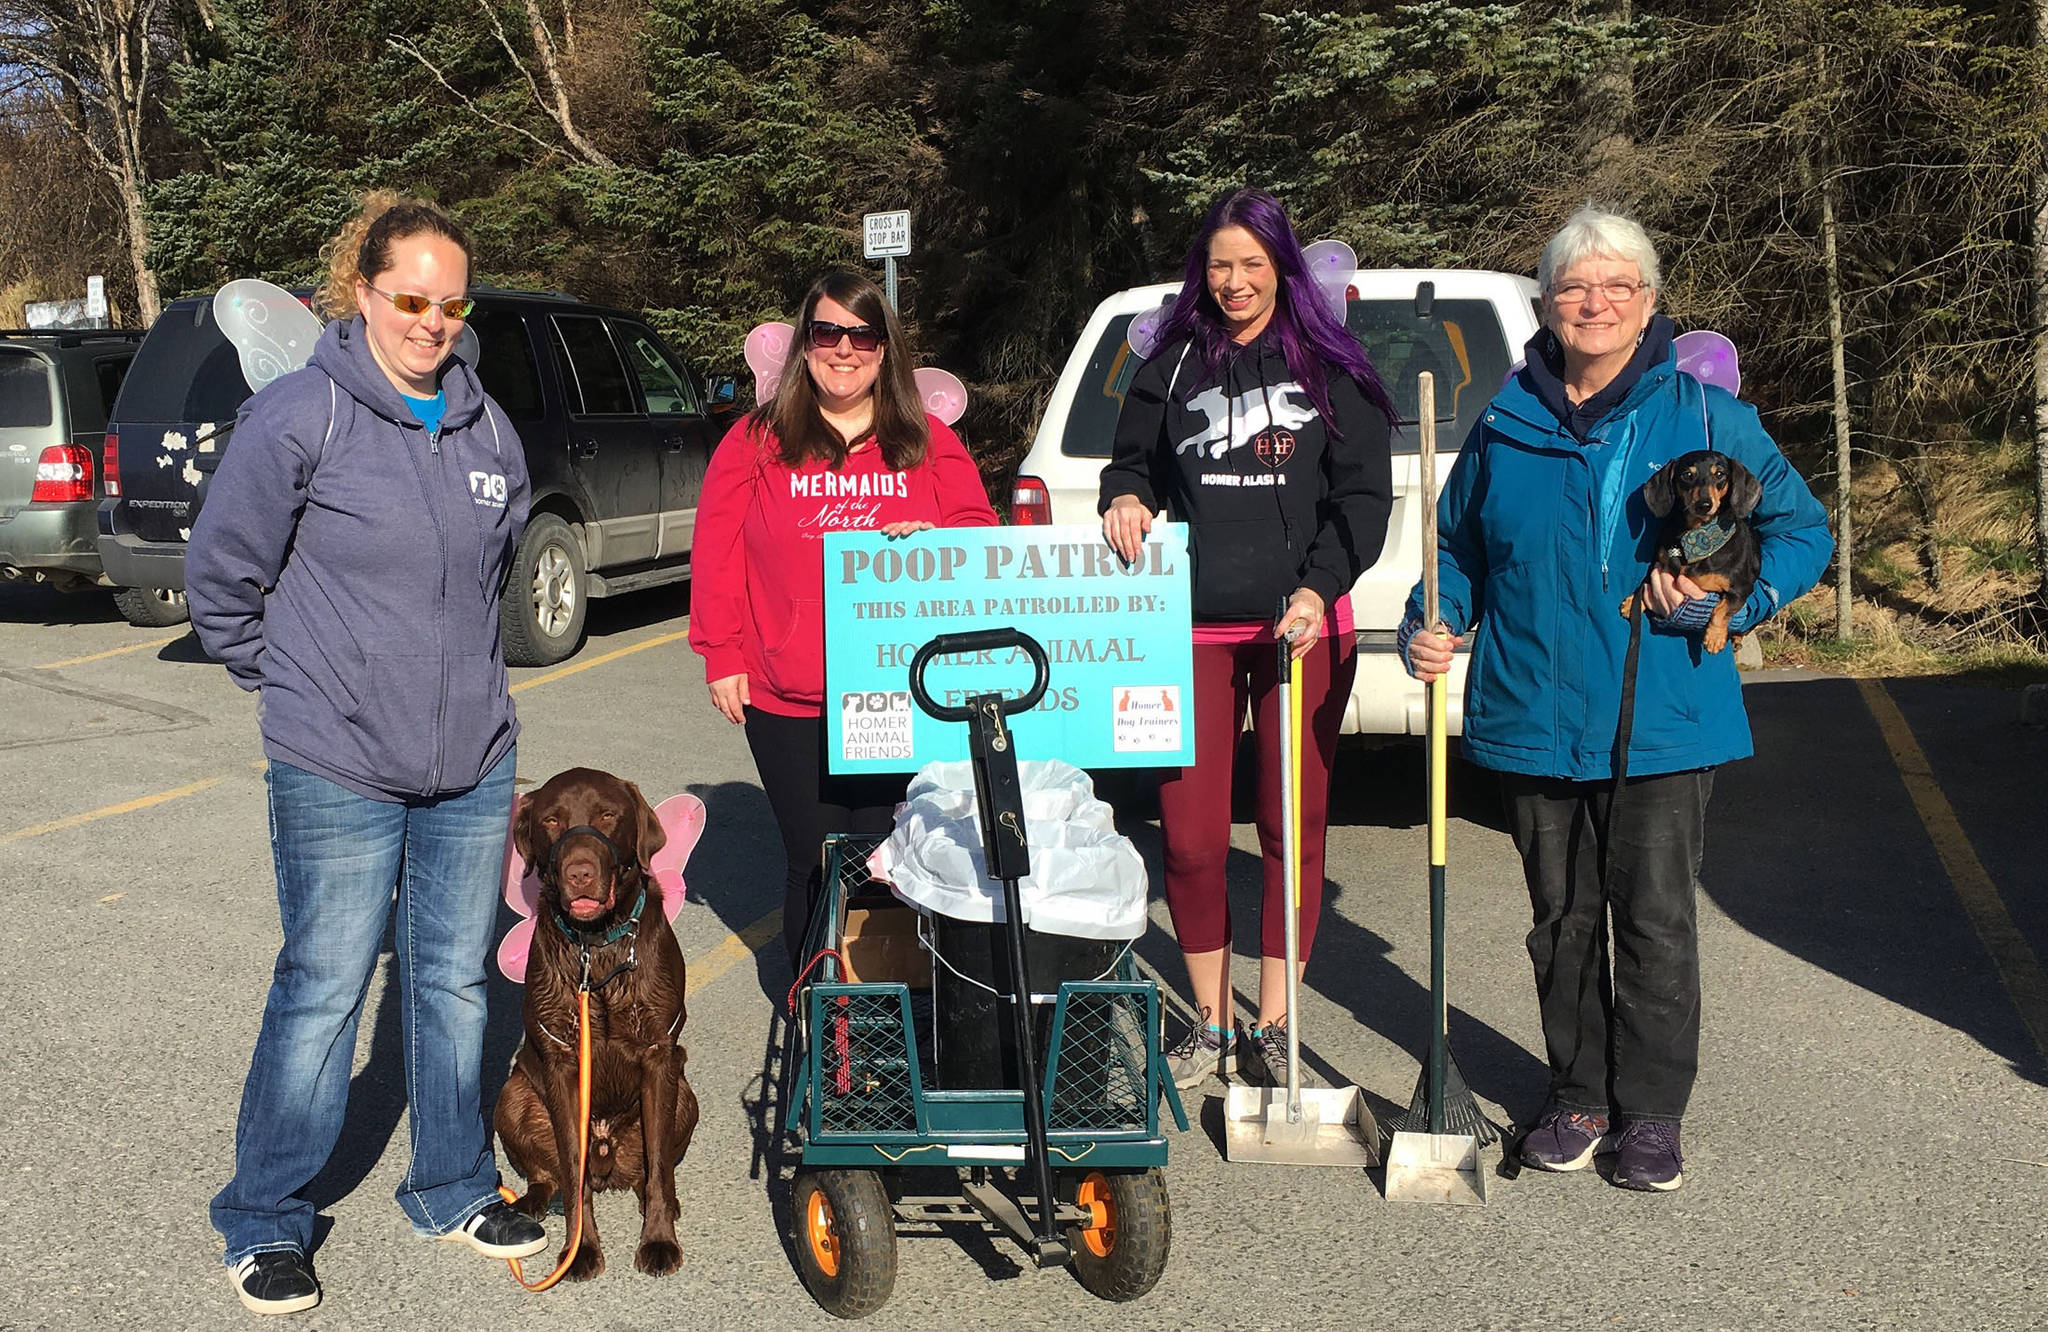 Members of the Homer Animal Friends participate in a Poop Patrol event on April 13, 2019 in Homer, Alaska. (Photo by Janelle Spurkland)